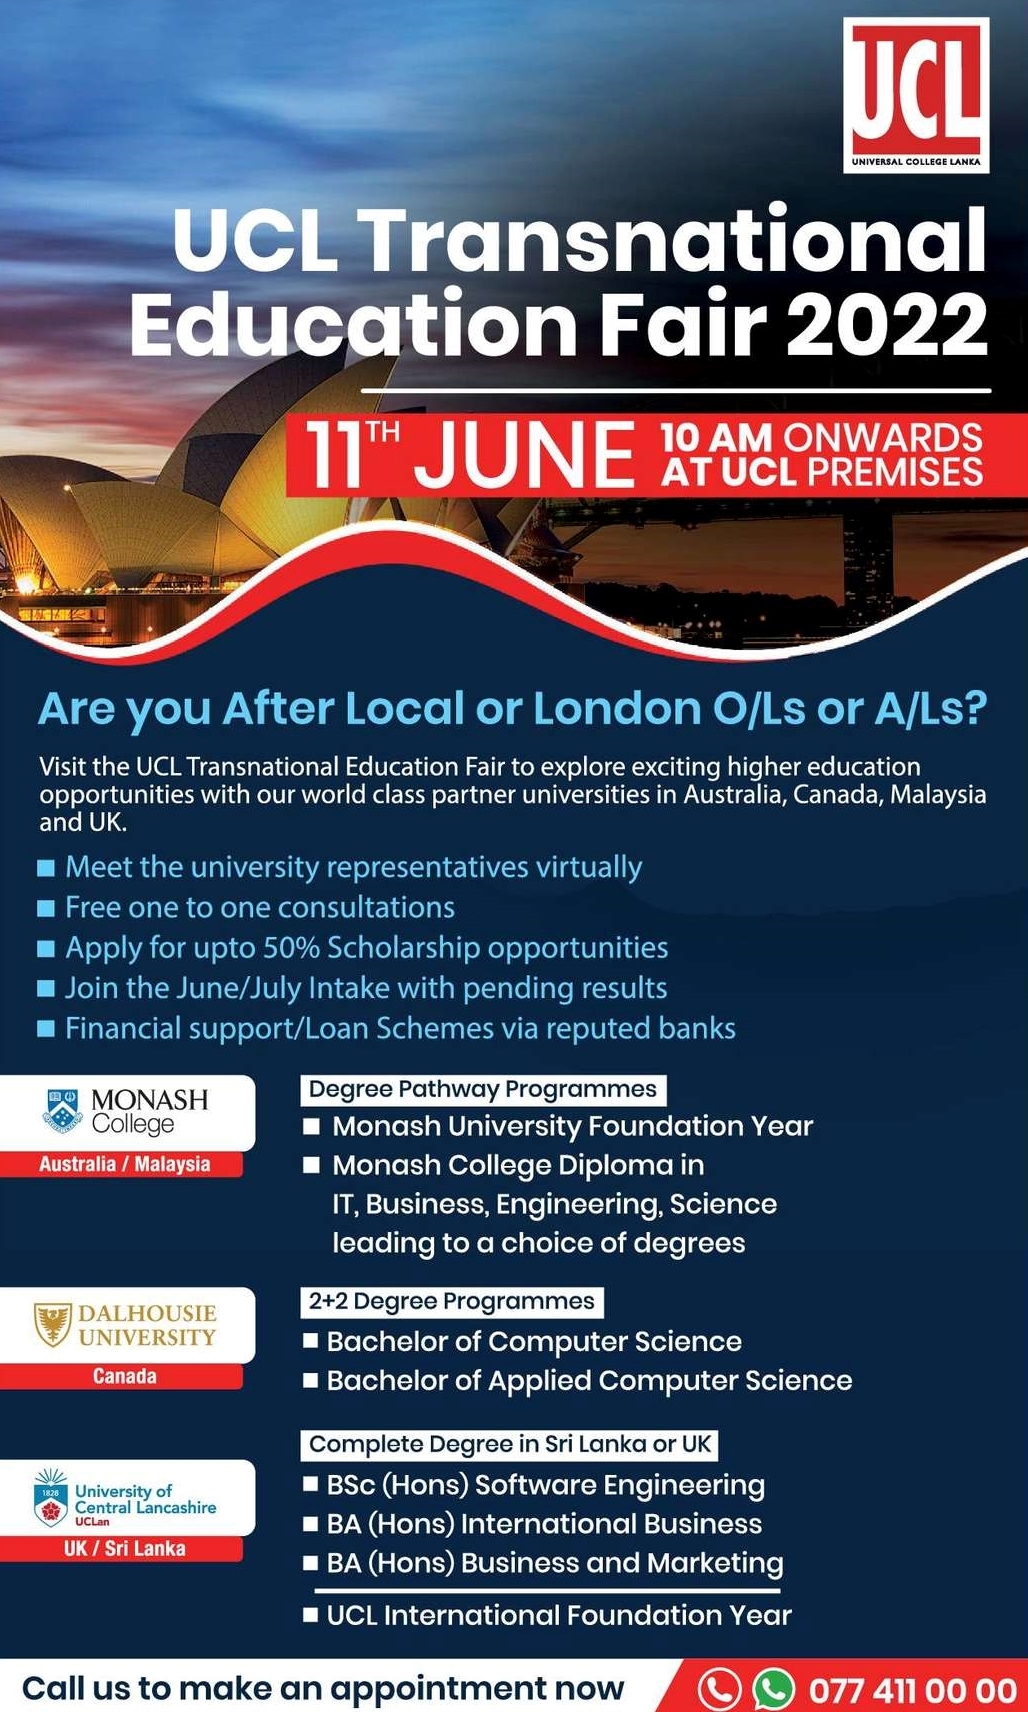 UCL Transnational Education Fair 2022 After O/L & A/L Degree - Universal College Courses Degree